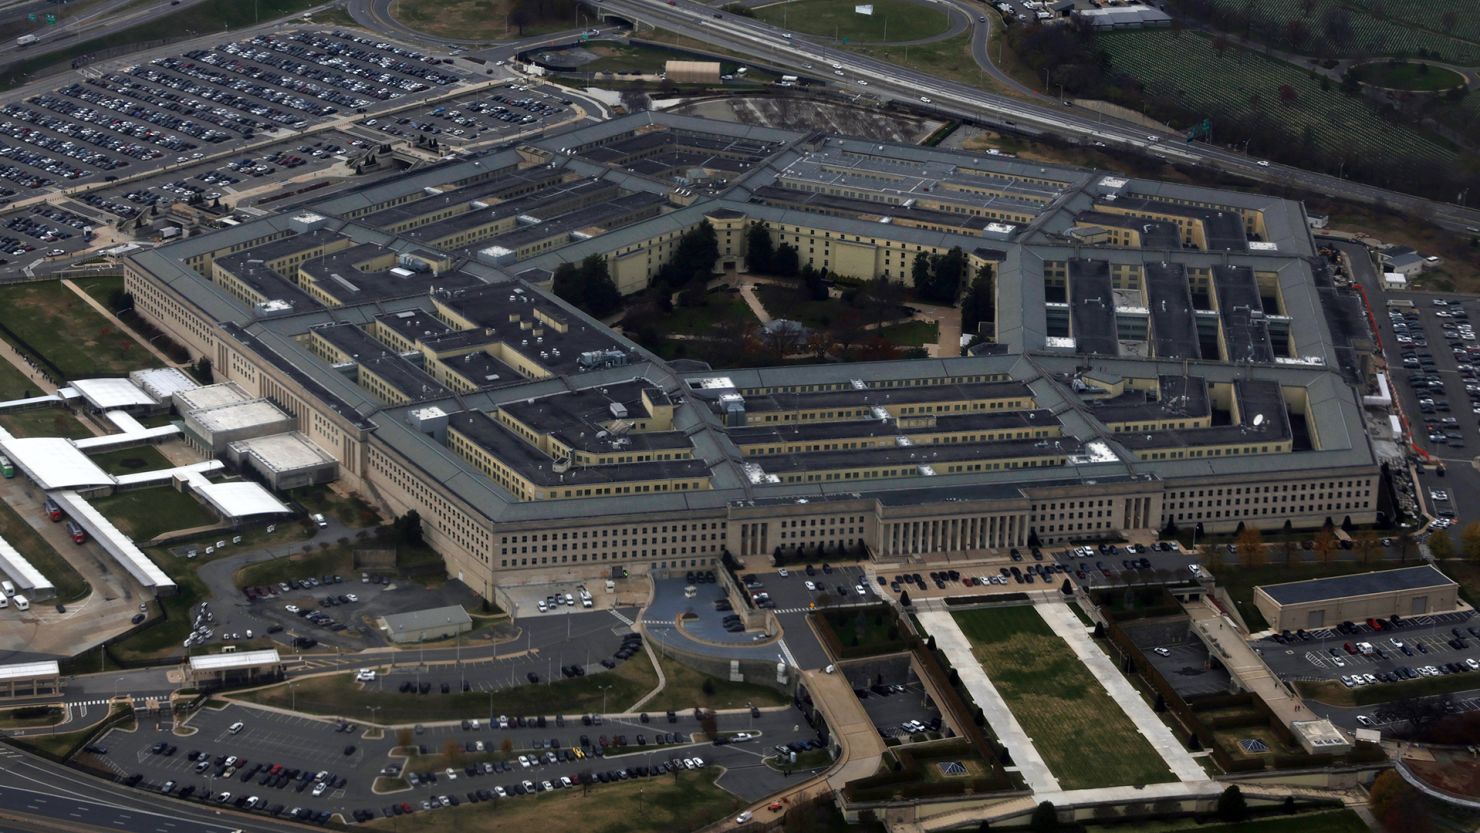 The Pentagon is seen from a flight taking off from Ronald Reagan Washington National Airport in Arlington, Virginia, on November 29, 2022.